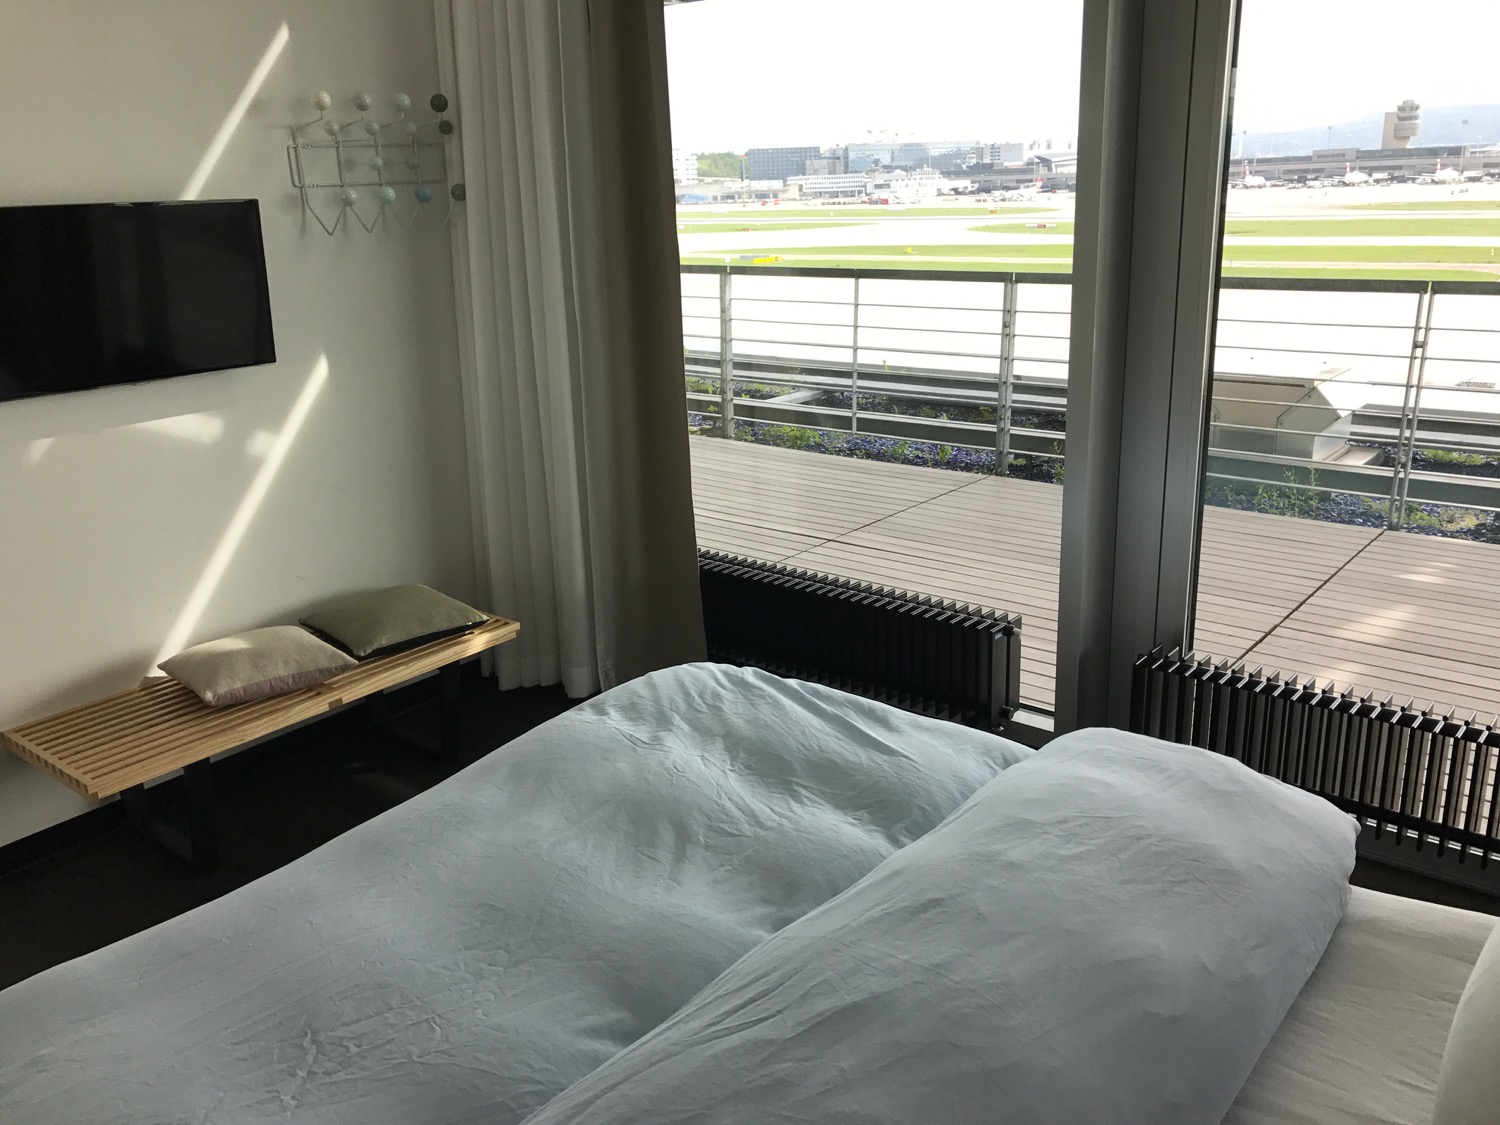 a bed with a view of the runway from the window